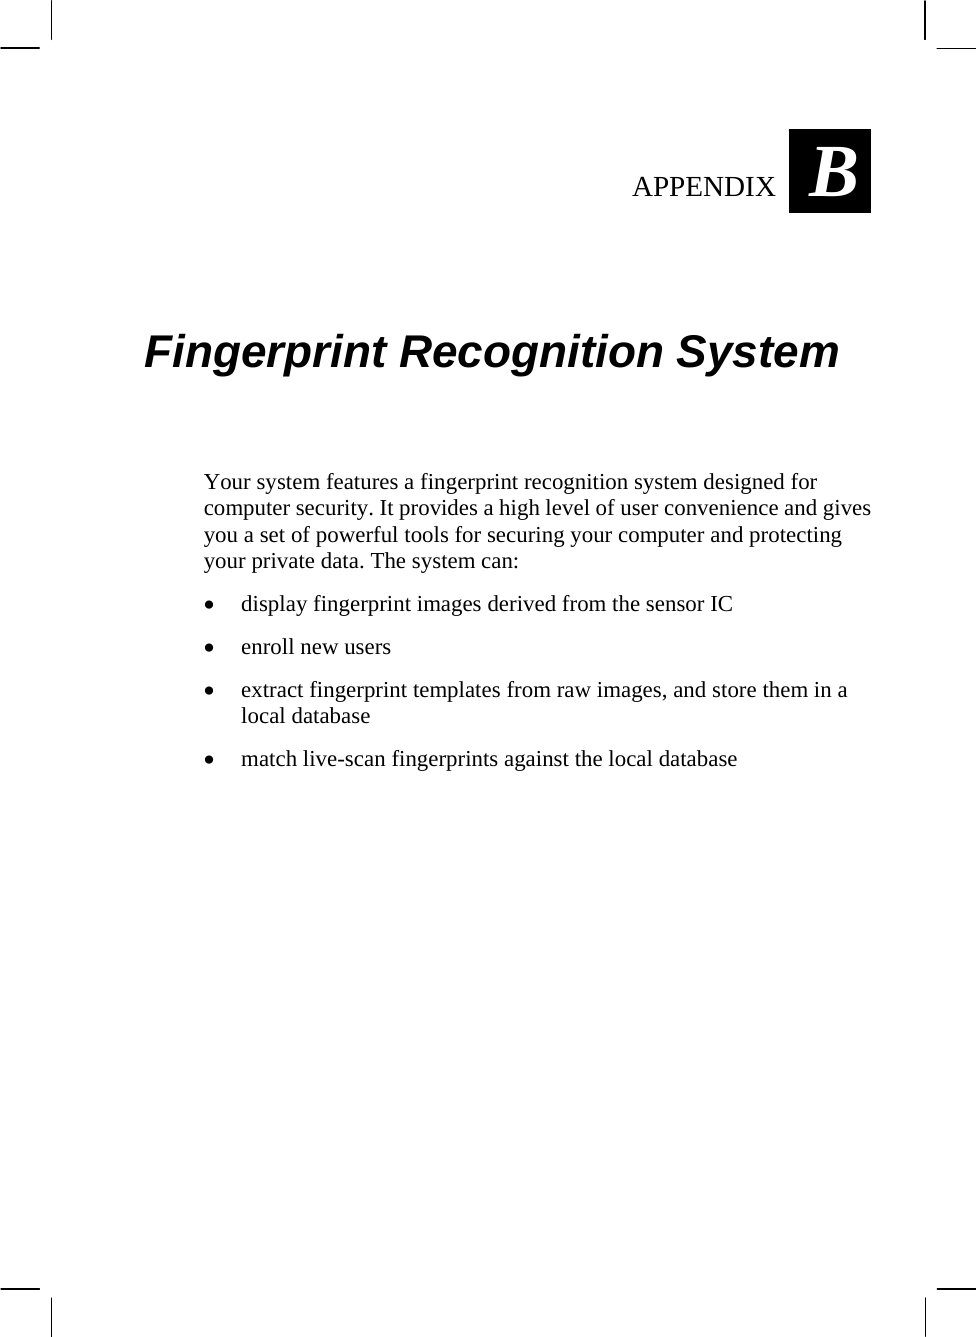  BAPPENDIX  Fingerprint Recognition System Your system features a fingerprint recognition system designed for computer security. It provides a high level of user convenience and gives you a set of powerful tools for securing your computer and protecting your private data. The system can: • display fingerprint images derived from the sensor IC • enroll new users • extract fingerprint templates from raw images, and store them in a local database • match live-scan fingerprints against the local database  